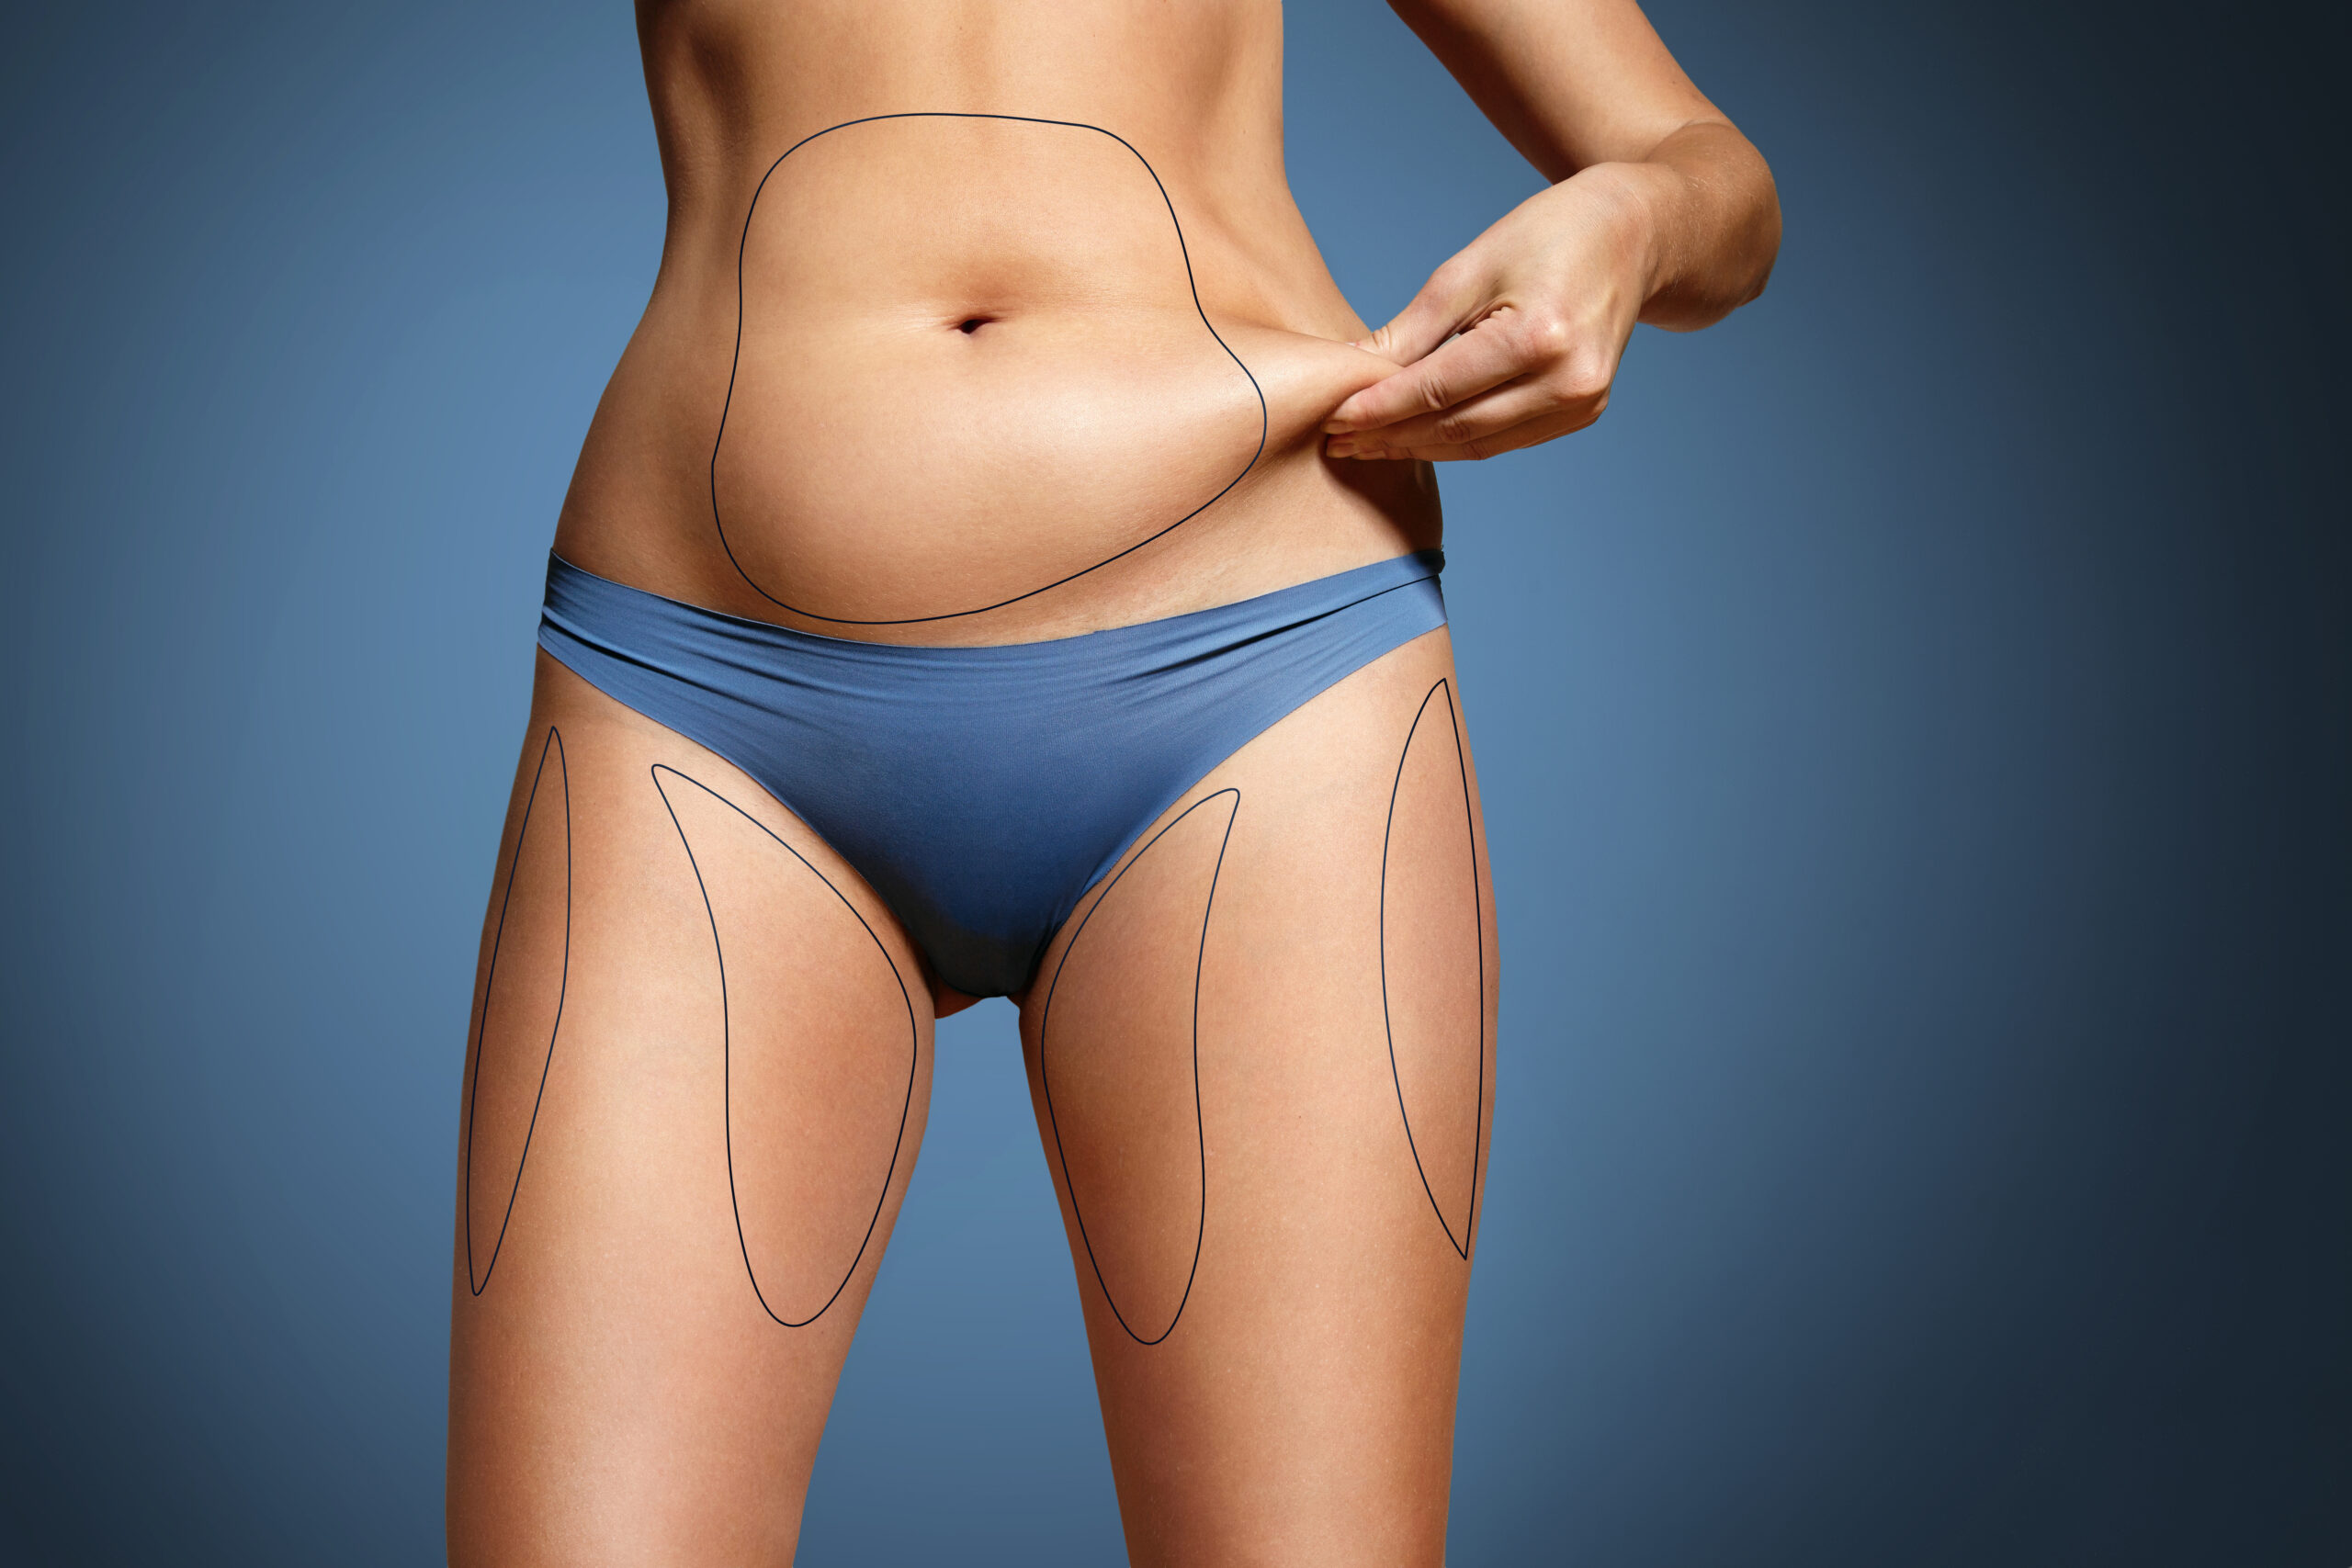 Liposuction vs. Lipo HD: How Are They Different?